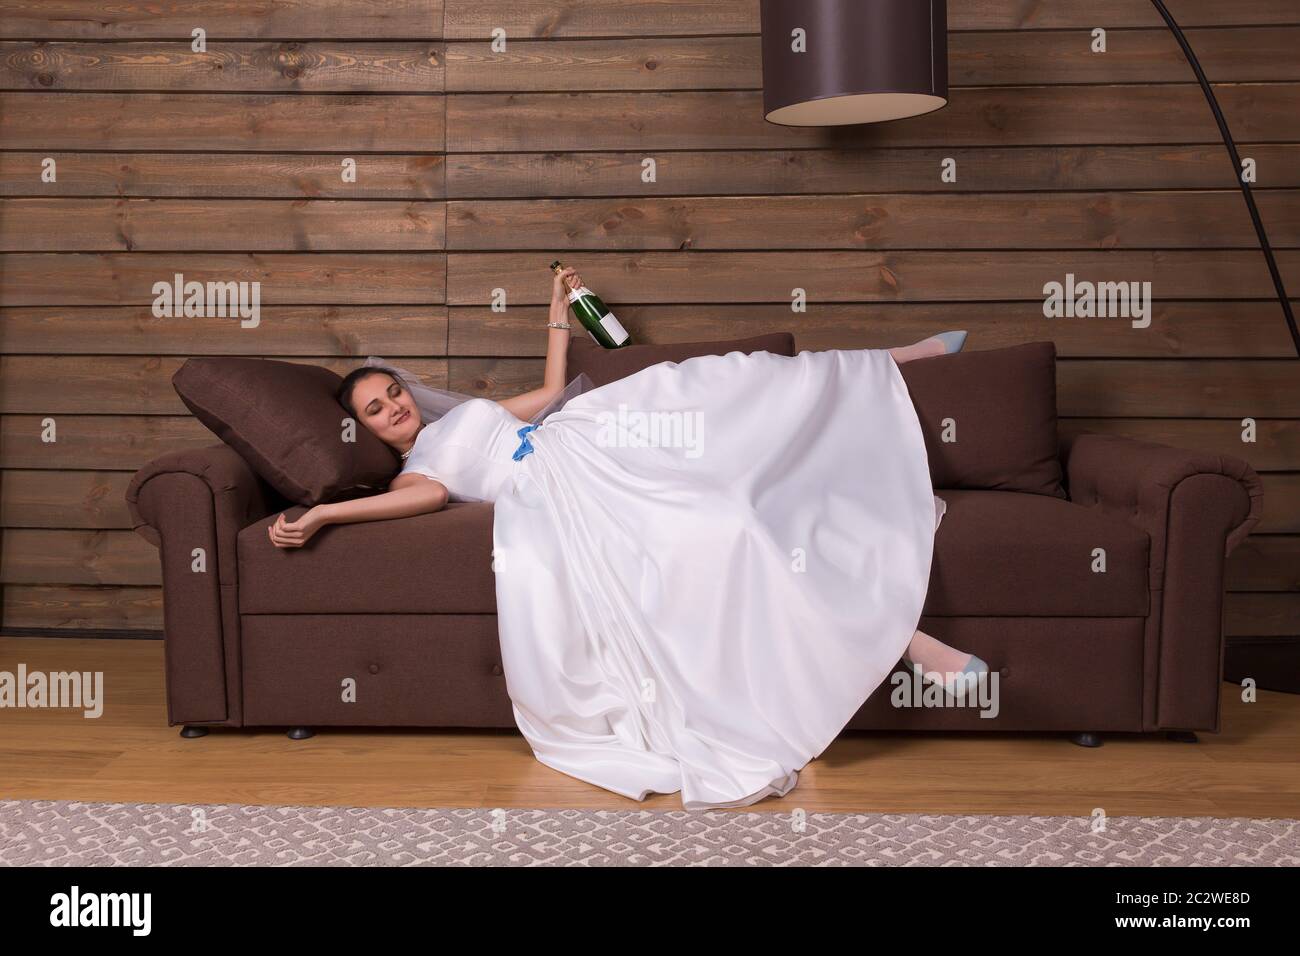 Drunk bride with bottle of alcohol in hand relax on couch after wedding celebration. Wooden interior of the room on background Stock Photo